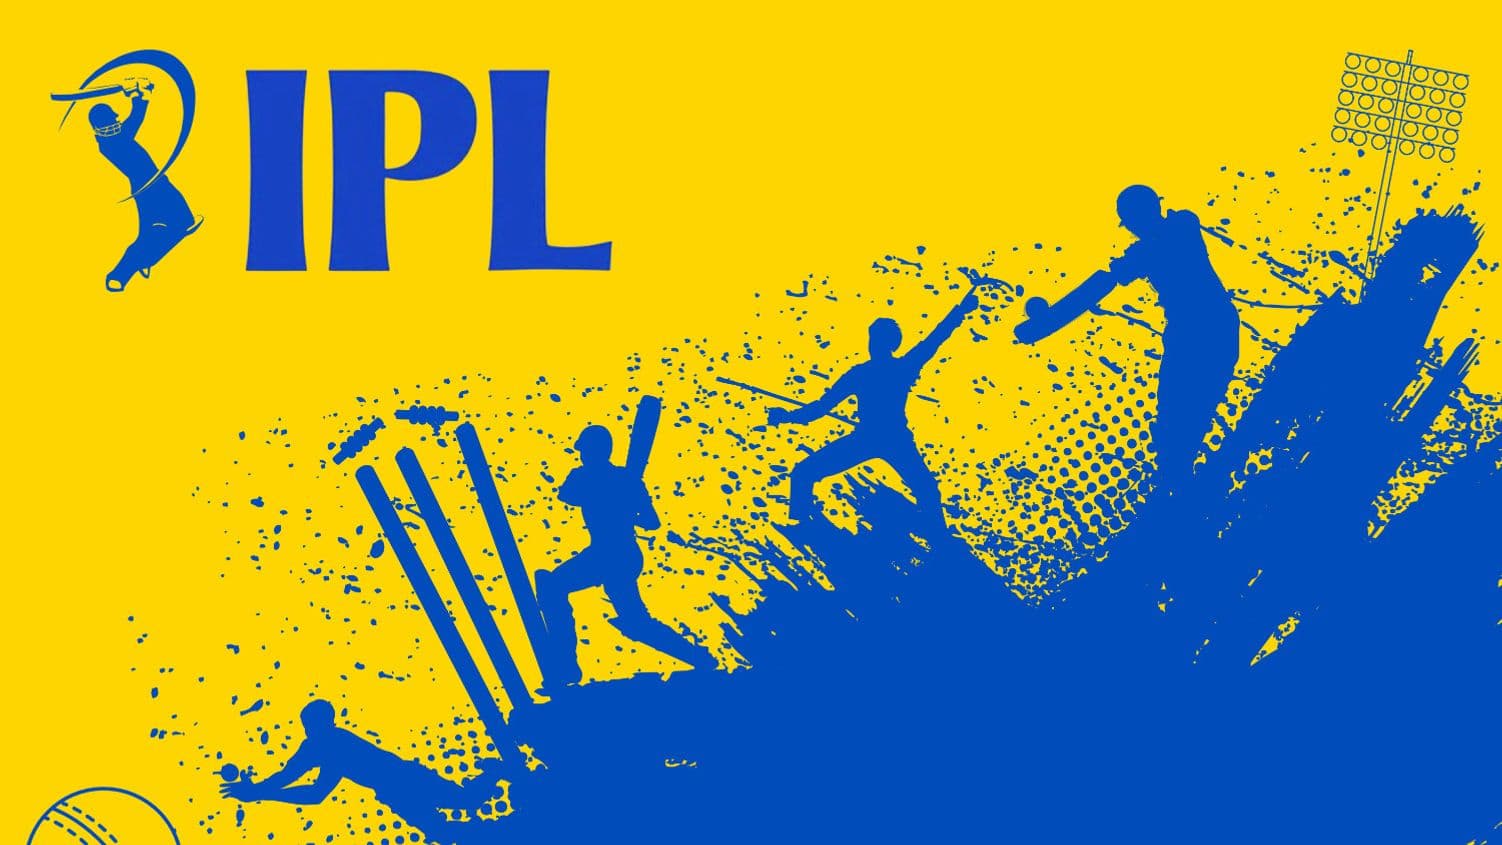 Despite digital growth, broadcasting rights drive IPL’s riches; league valued over $10B now